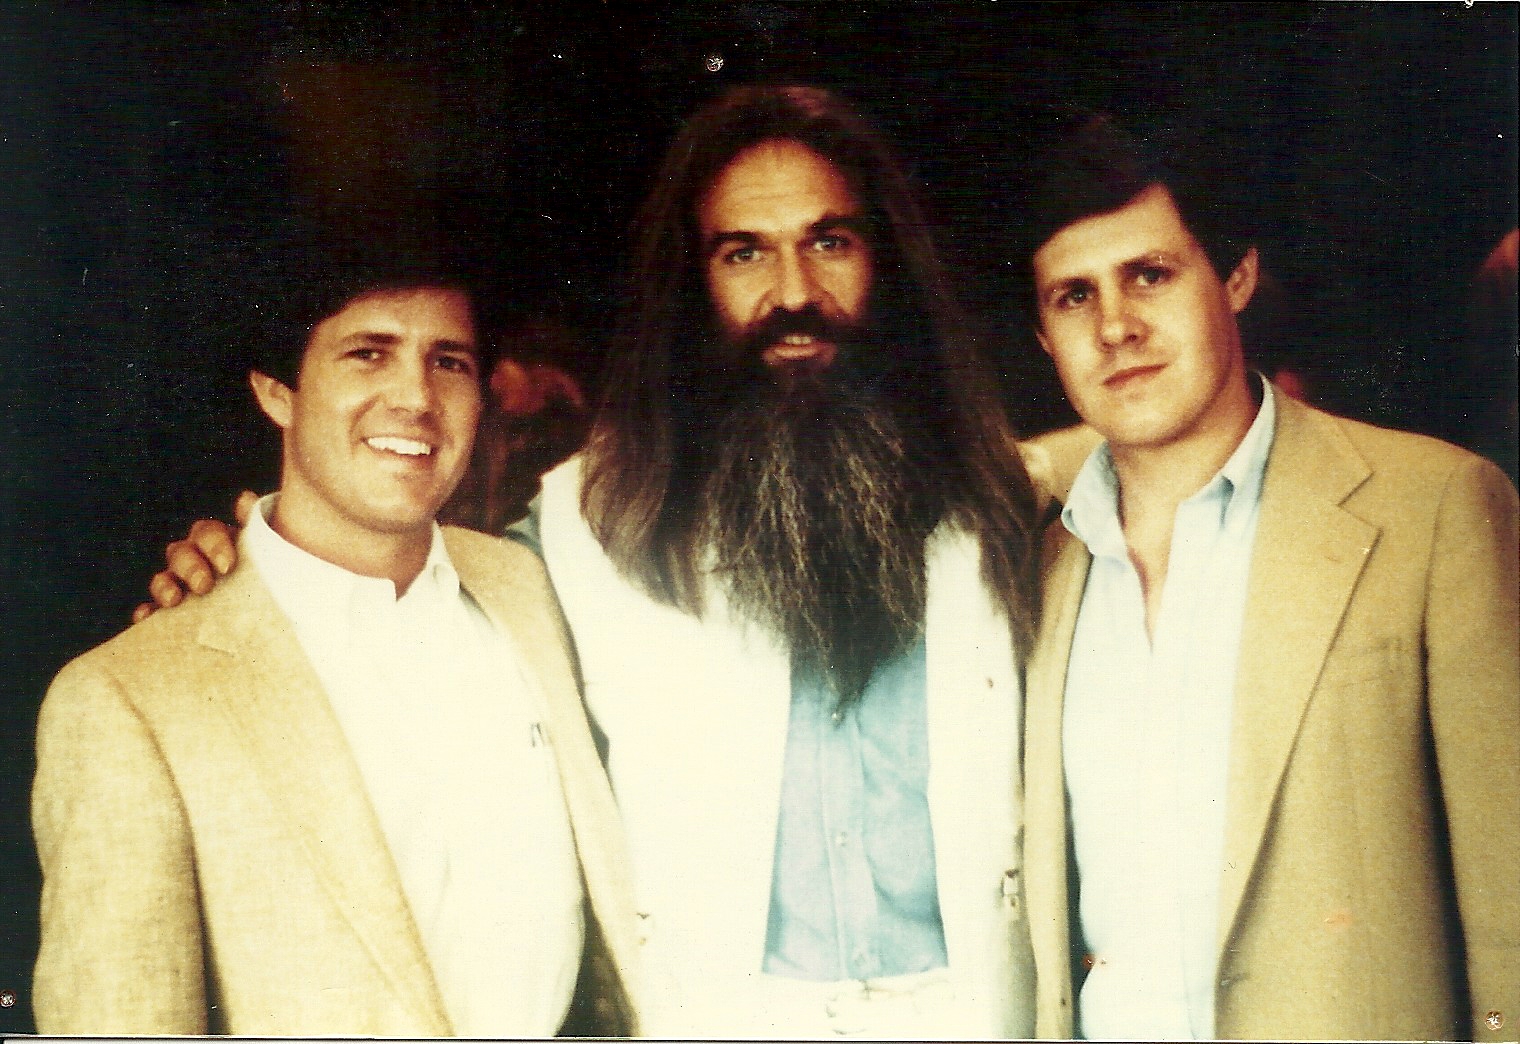 William Lee Golden of the Oak Ridge Boys with the McCain Brothers in Oklahoma City.